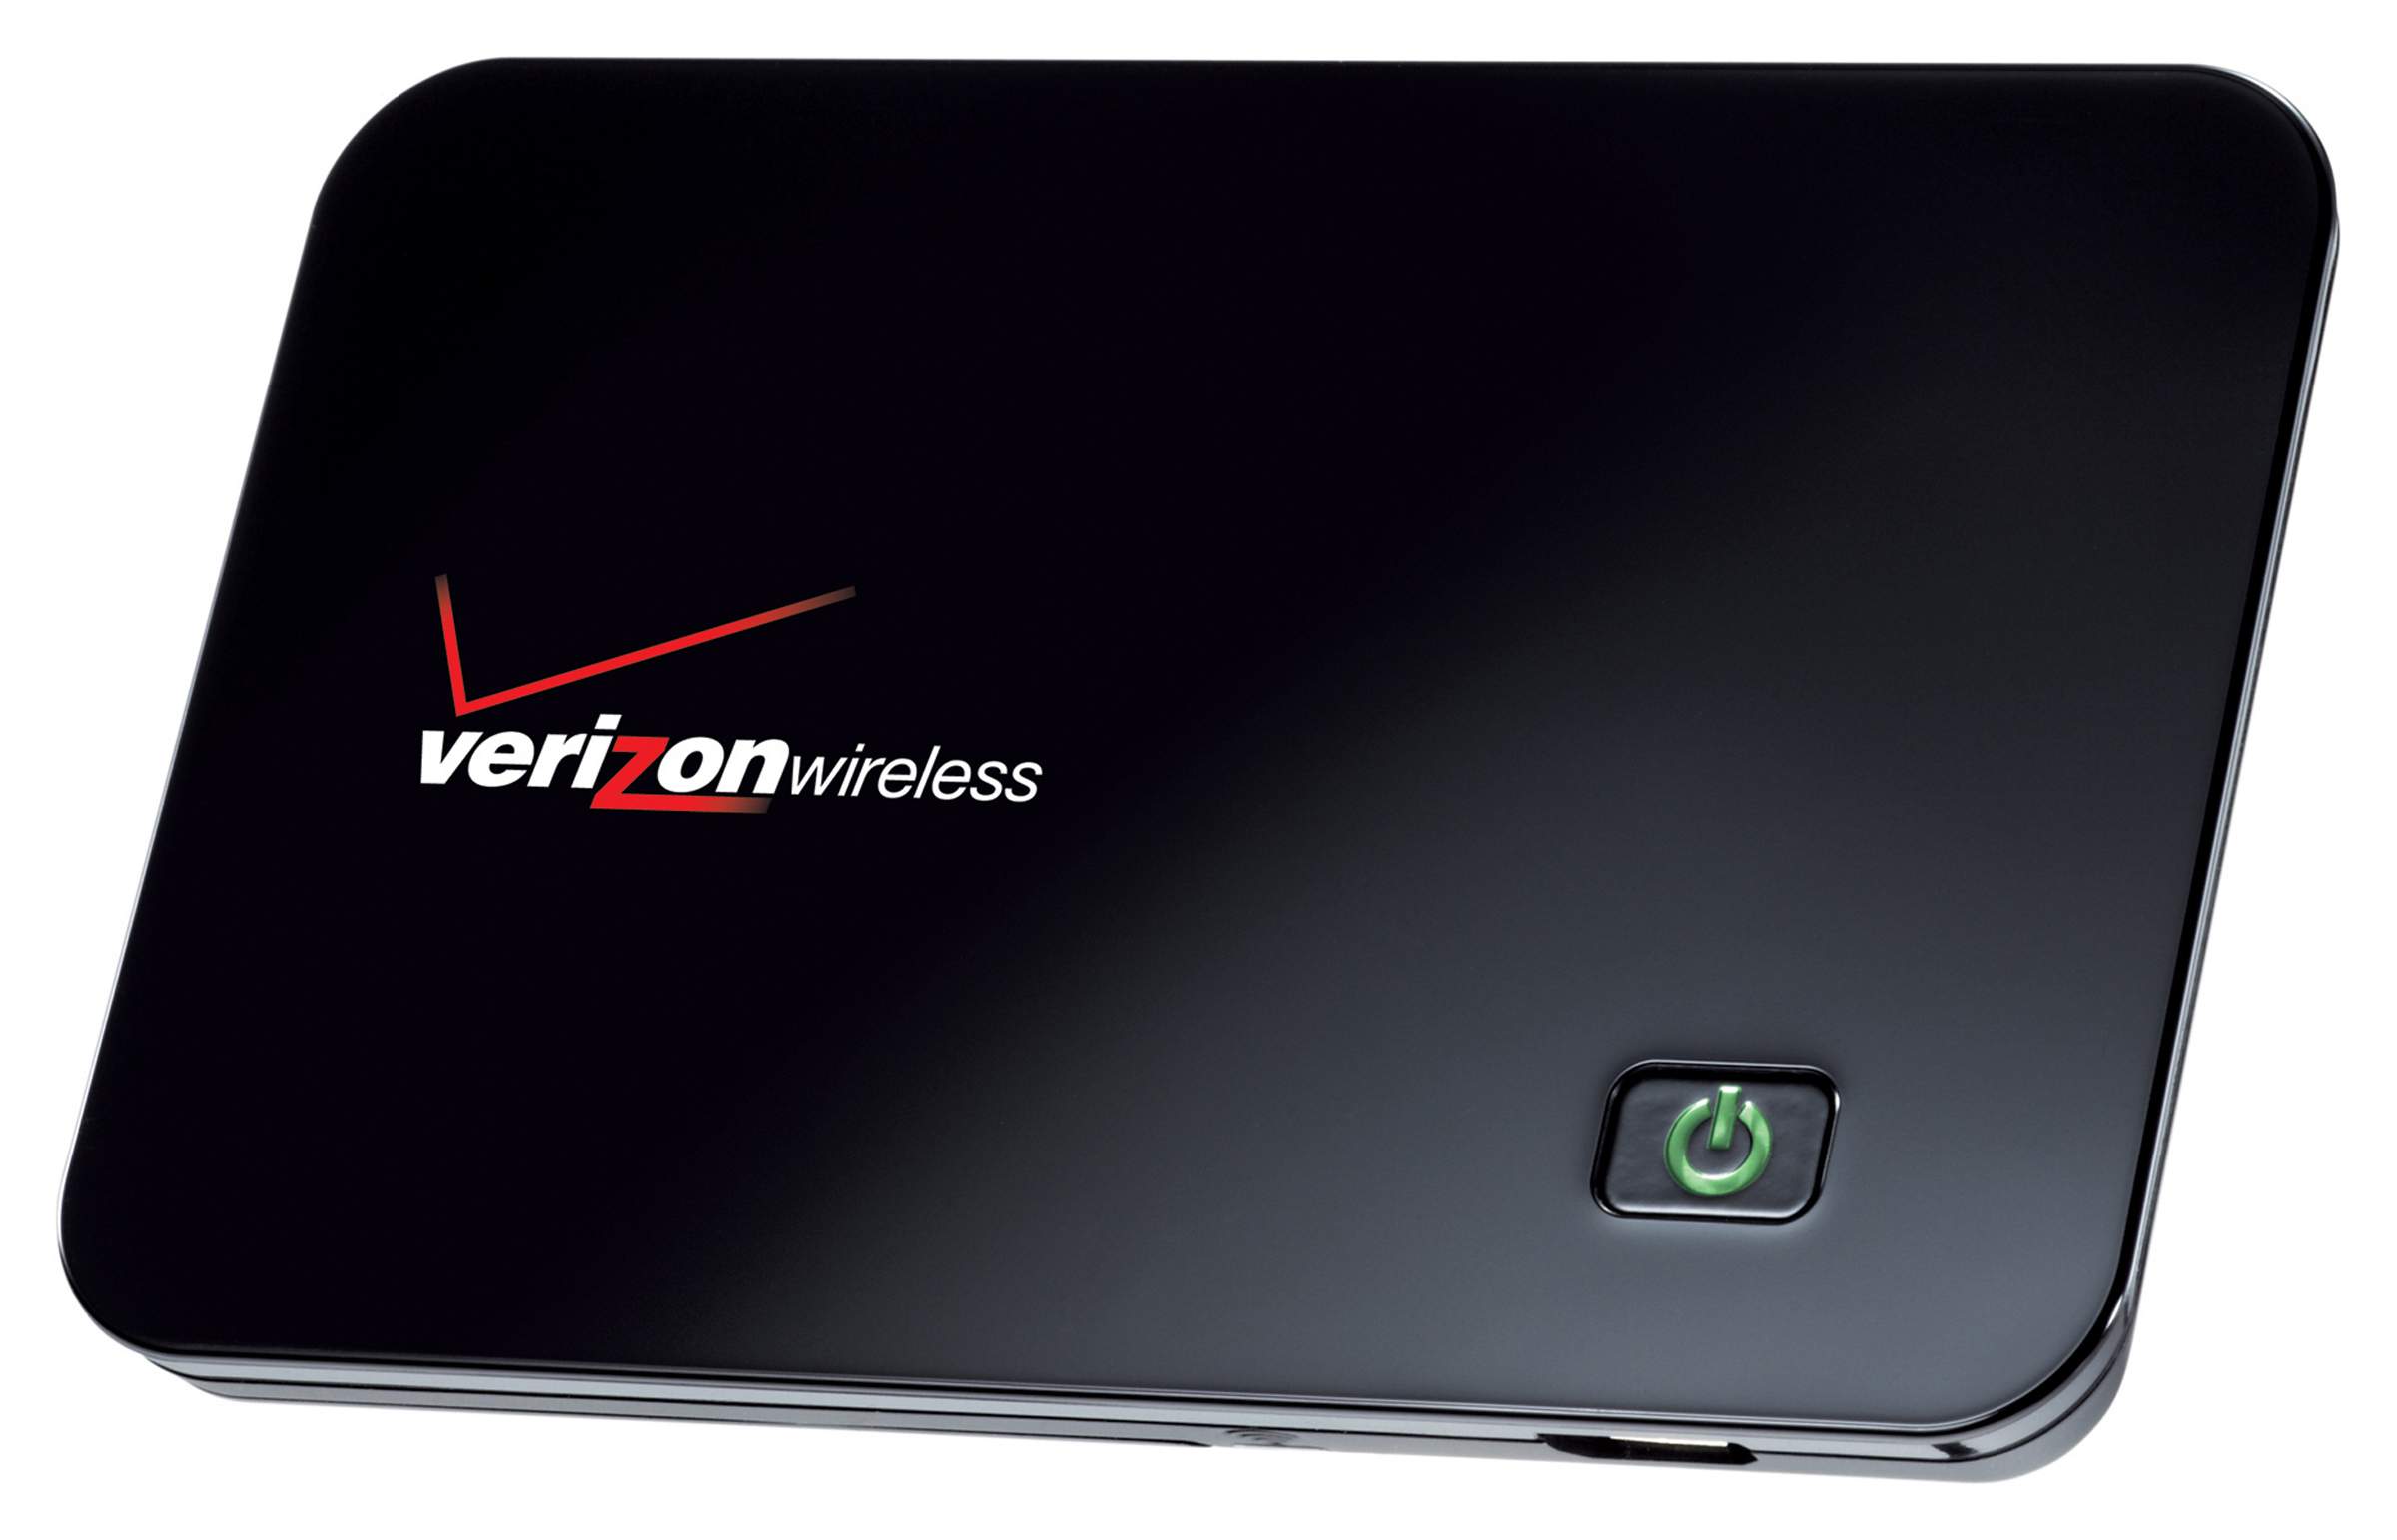 Physical Impressions and Aesthetics Novatel Wireless MiFi 4510L Review The Best 4G LTE WiFi